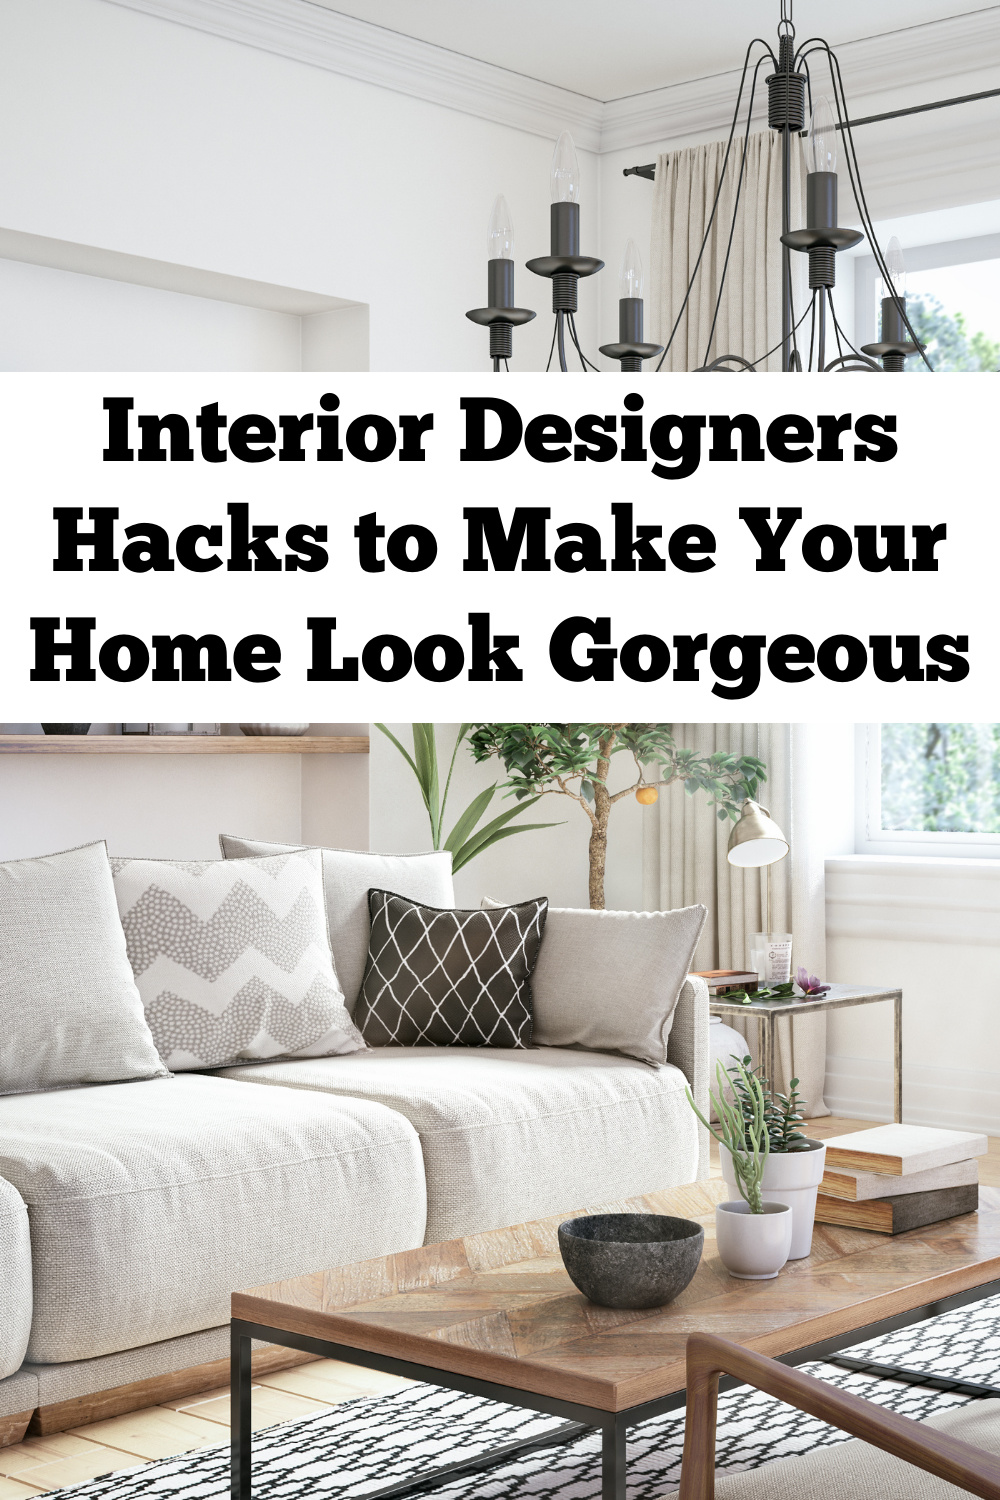 Interior Designers Hacks to Make Your Home Look Gorgeous